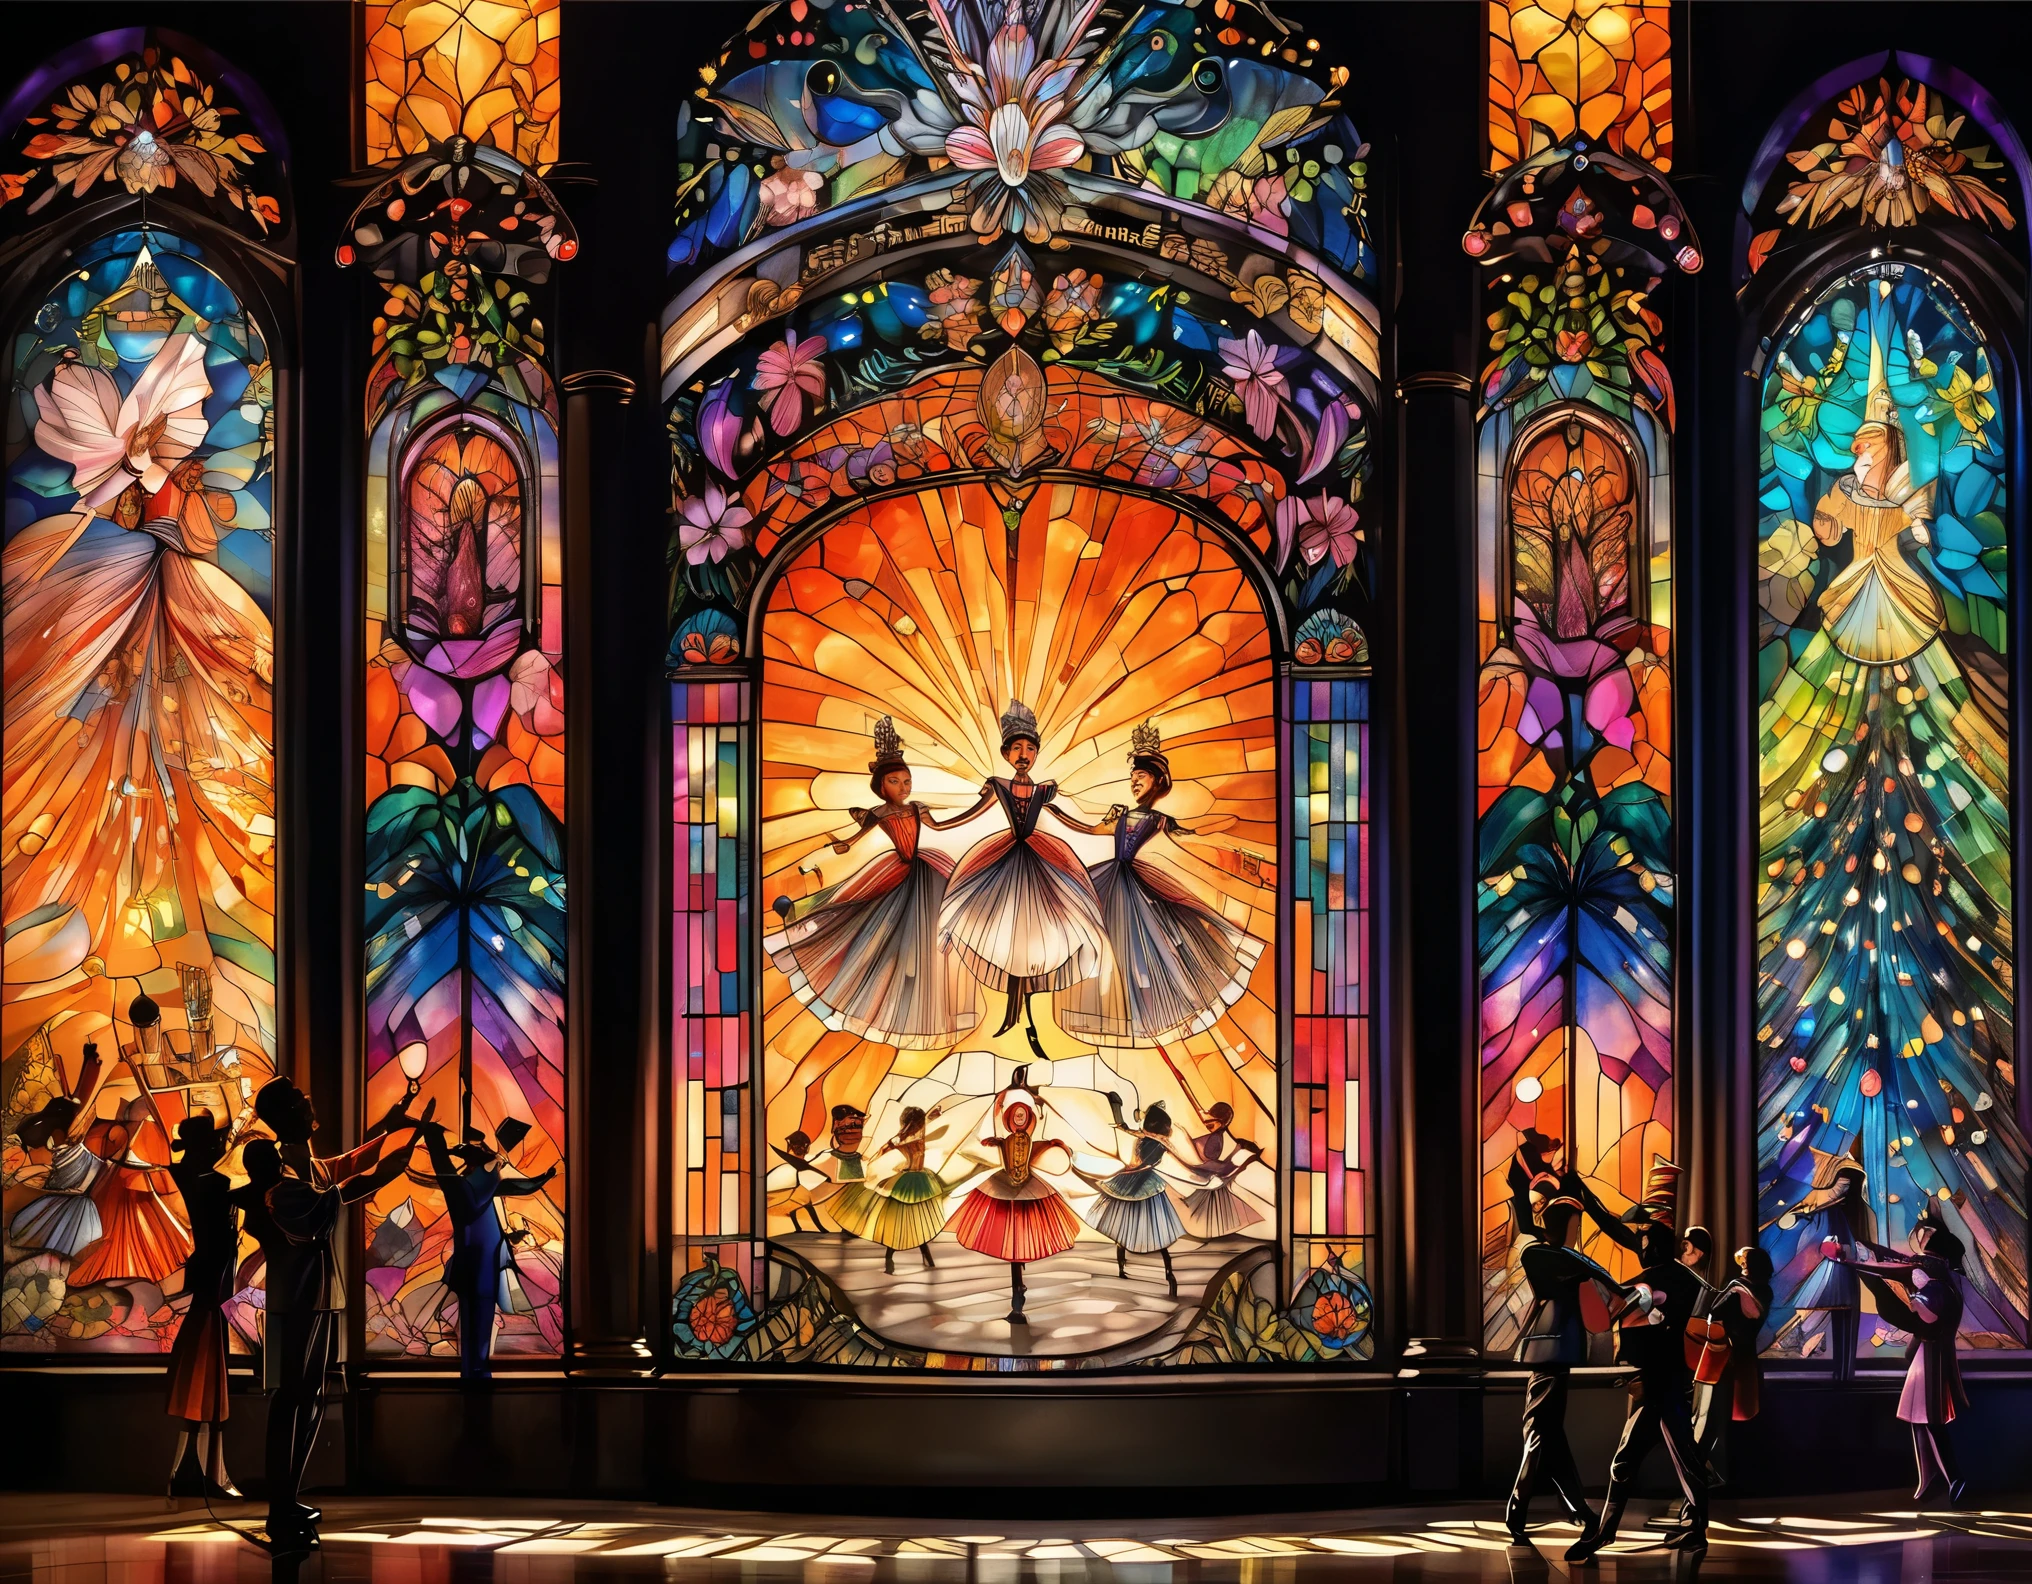 best quality, super fine, 16k, incredibly absurdres, extremely detailed, dramatic drawing of the Nutcracker, the characters are monochrome black shadow puppets, the background is iridescent colorful jewels and stained glass, orange-tinged lighting